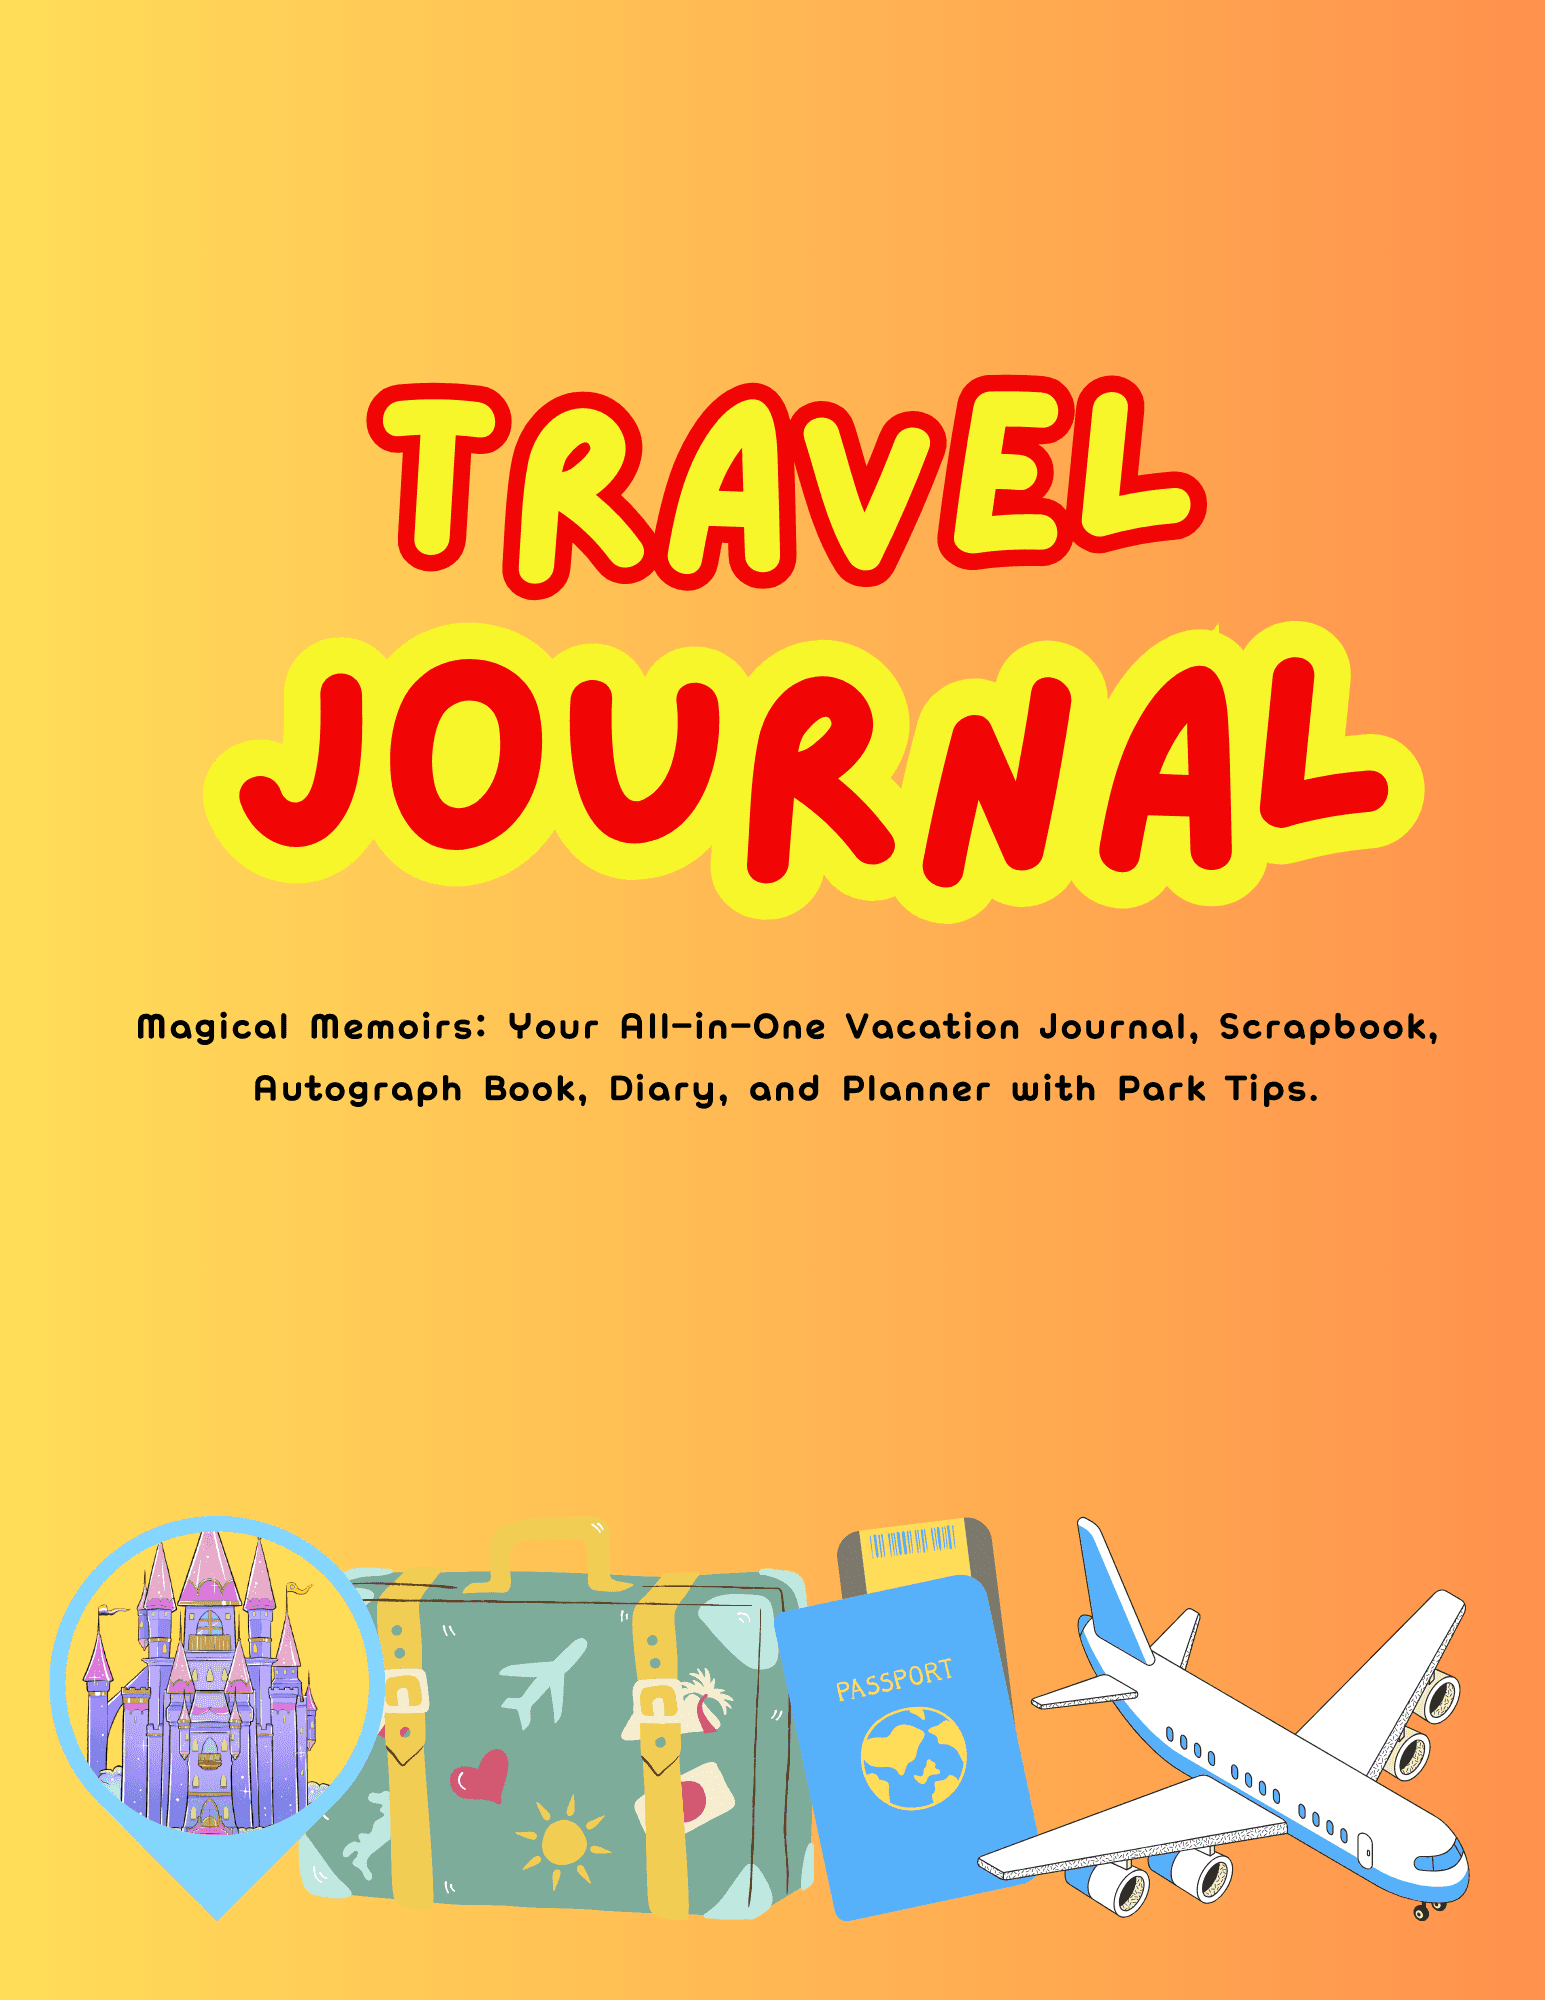 Announcing Our All-in-One Travel Journal